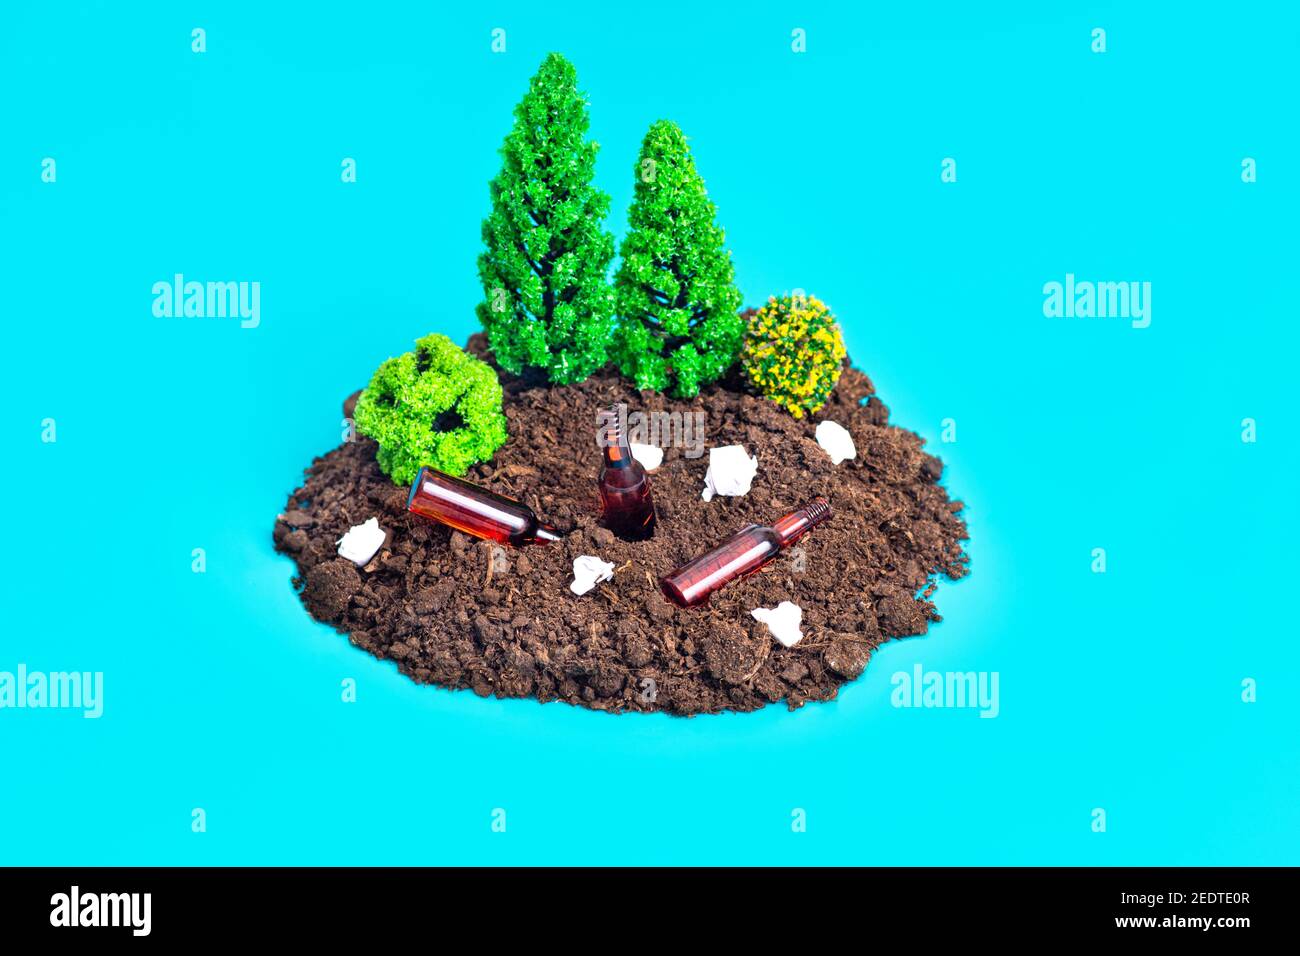 Miniature toy forest composition on a blue background with paper rubbish and tiny beer bottles lying around. Environmental impact concept. Stock Photo